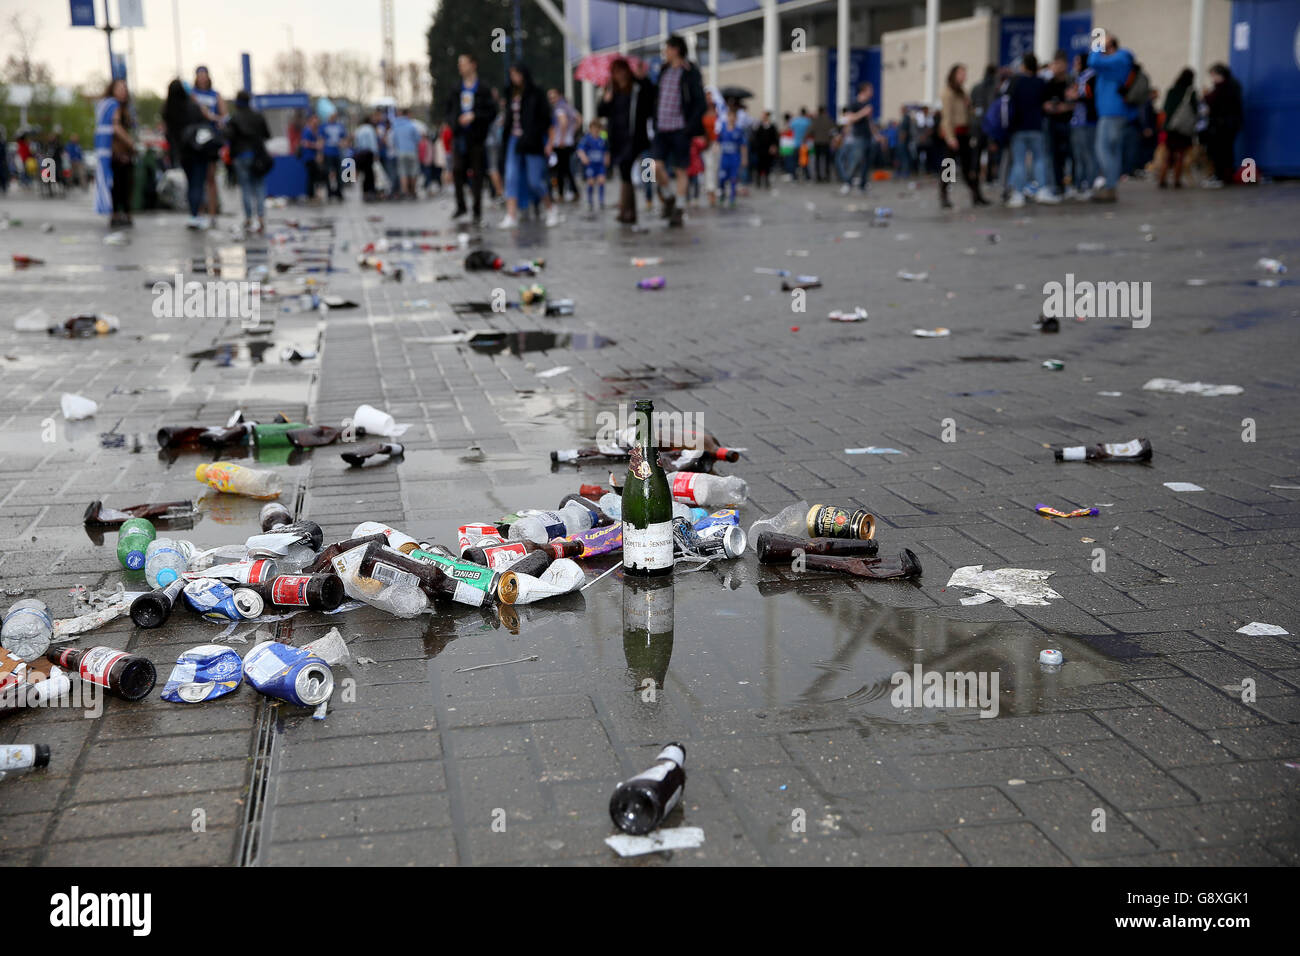 Leicester City Fans After Winning The 2015-16 Barclays Premier League. The aftermath of Leicester City fans celebrating outside the King Power Stadium in Leicester. Stock Photo